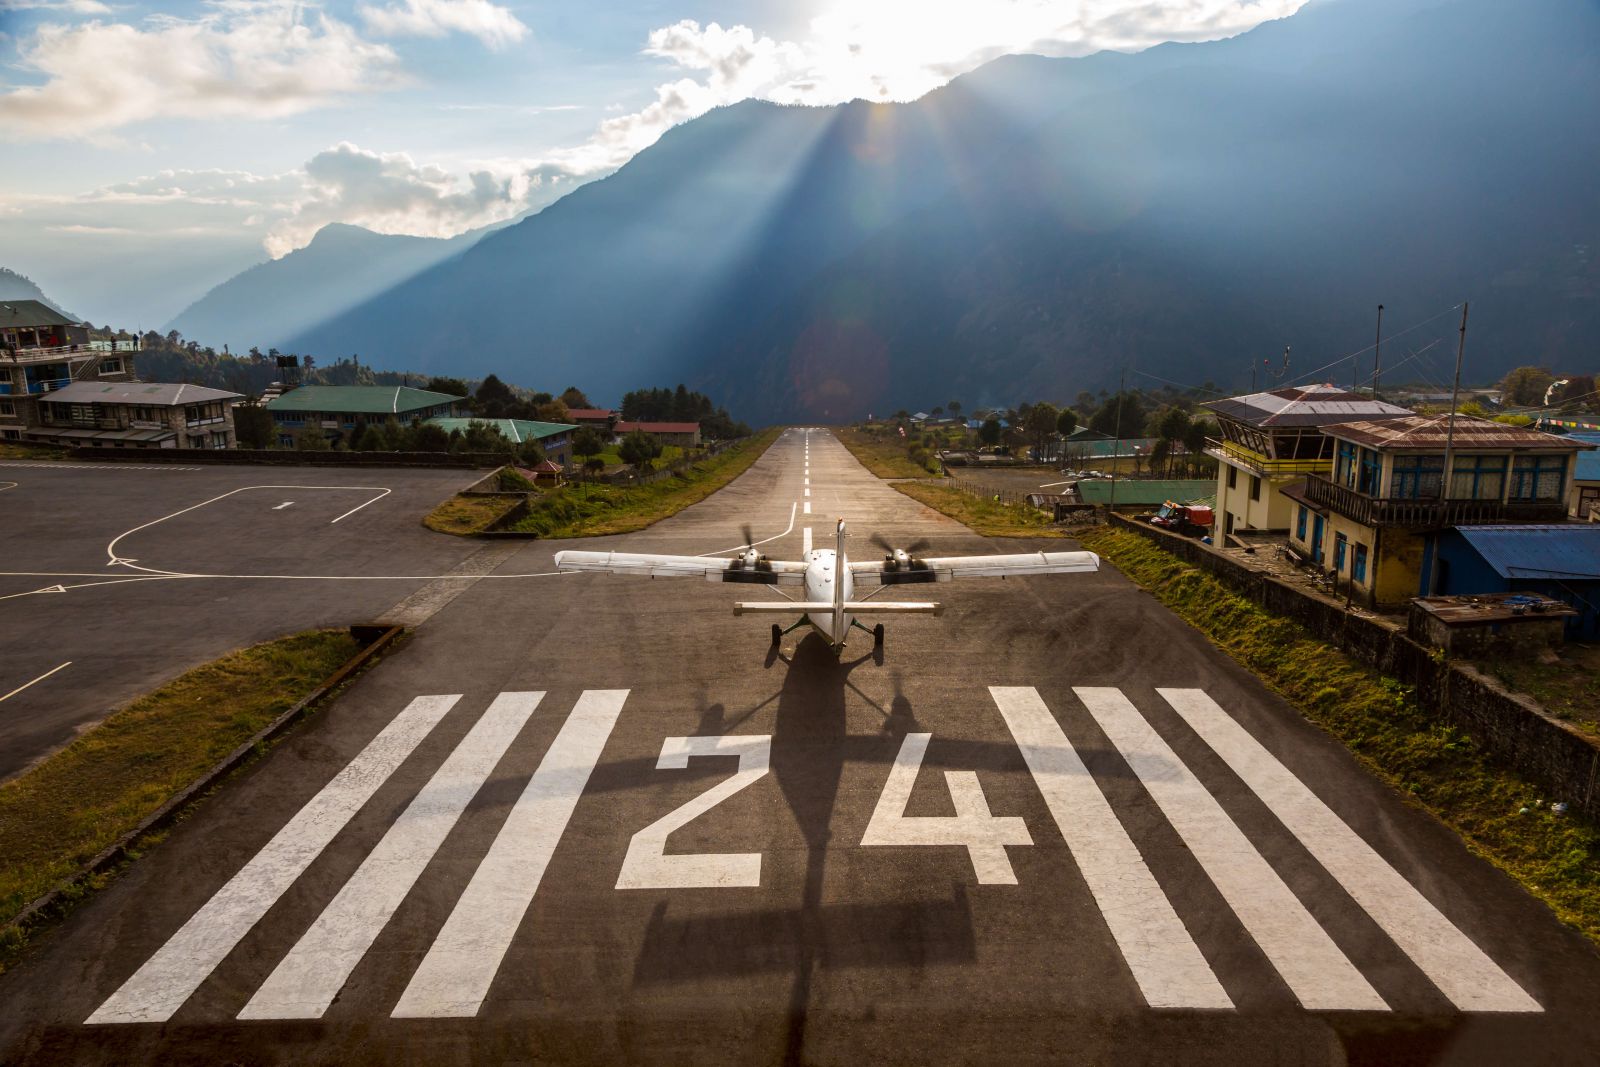 Airplane preparing for take off on Short Runway of small Airport ending at deep Mountains in Sunset Light